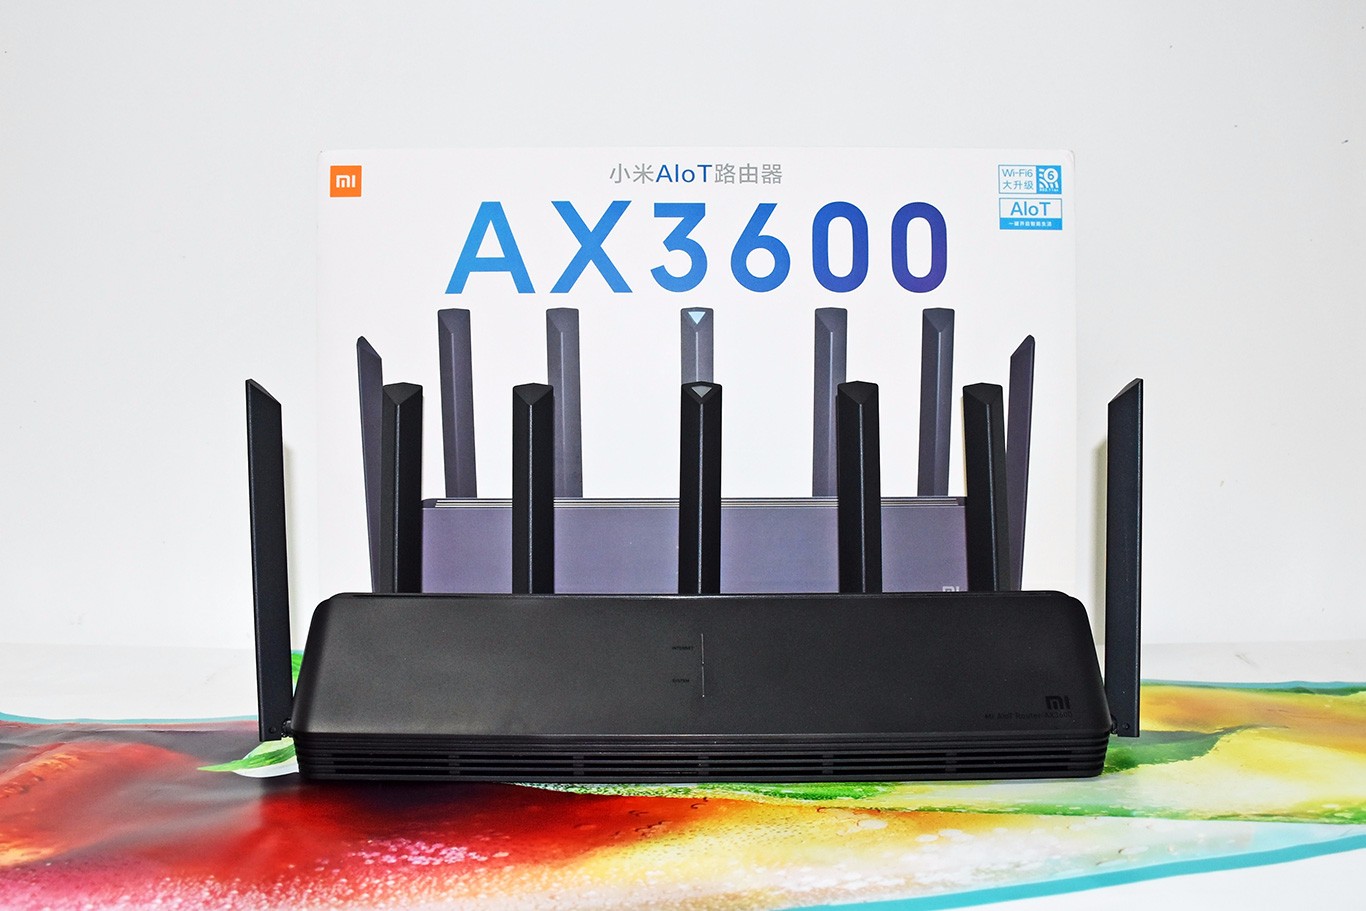 Tend alley bang Xiaomi AIoT router AX3600 Review - The Most Affordable WiFi 6 Router?